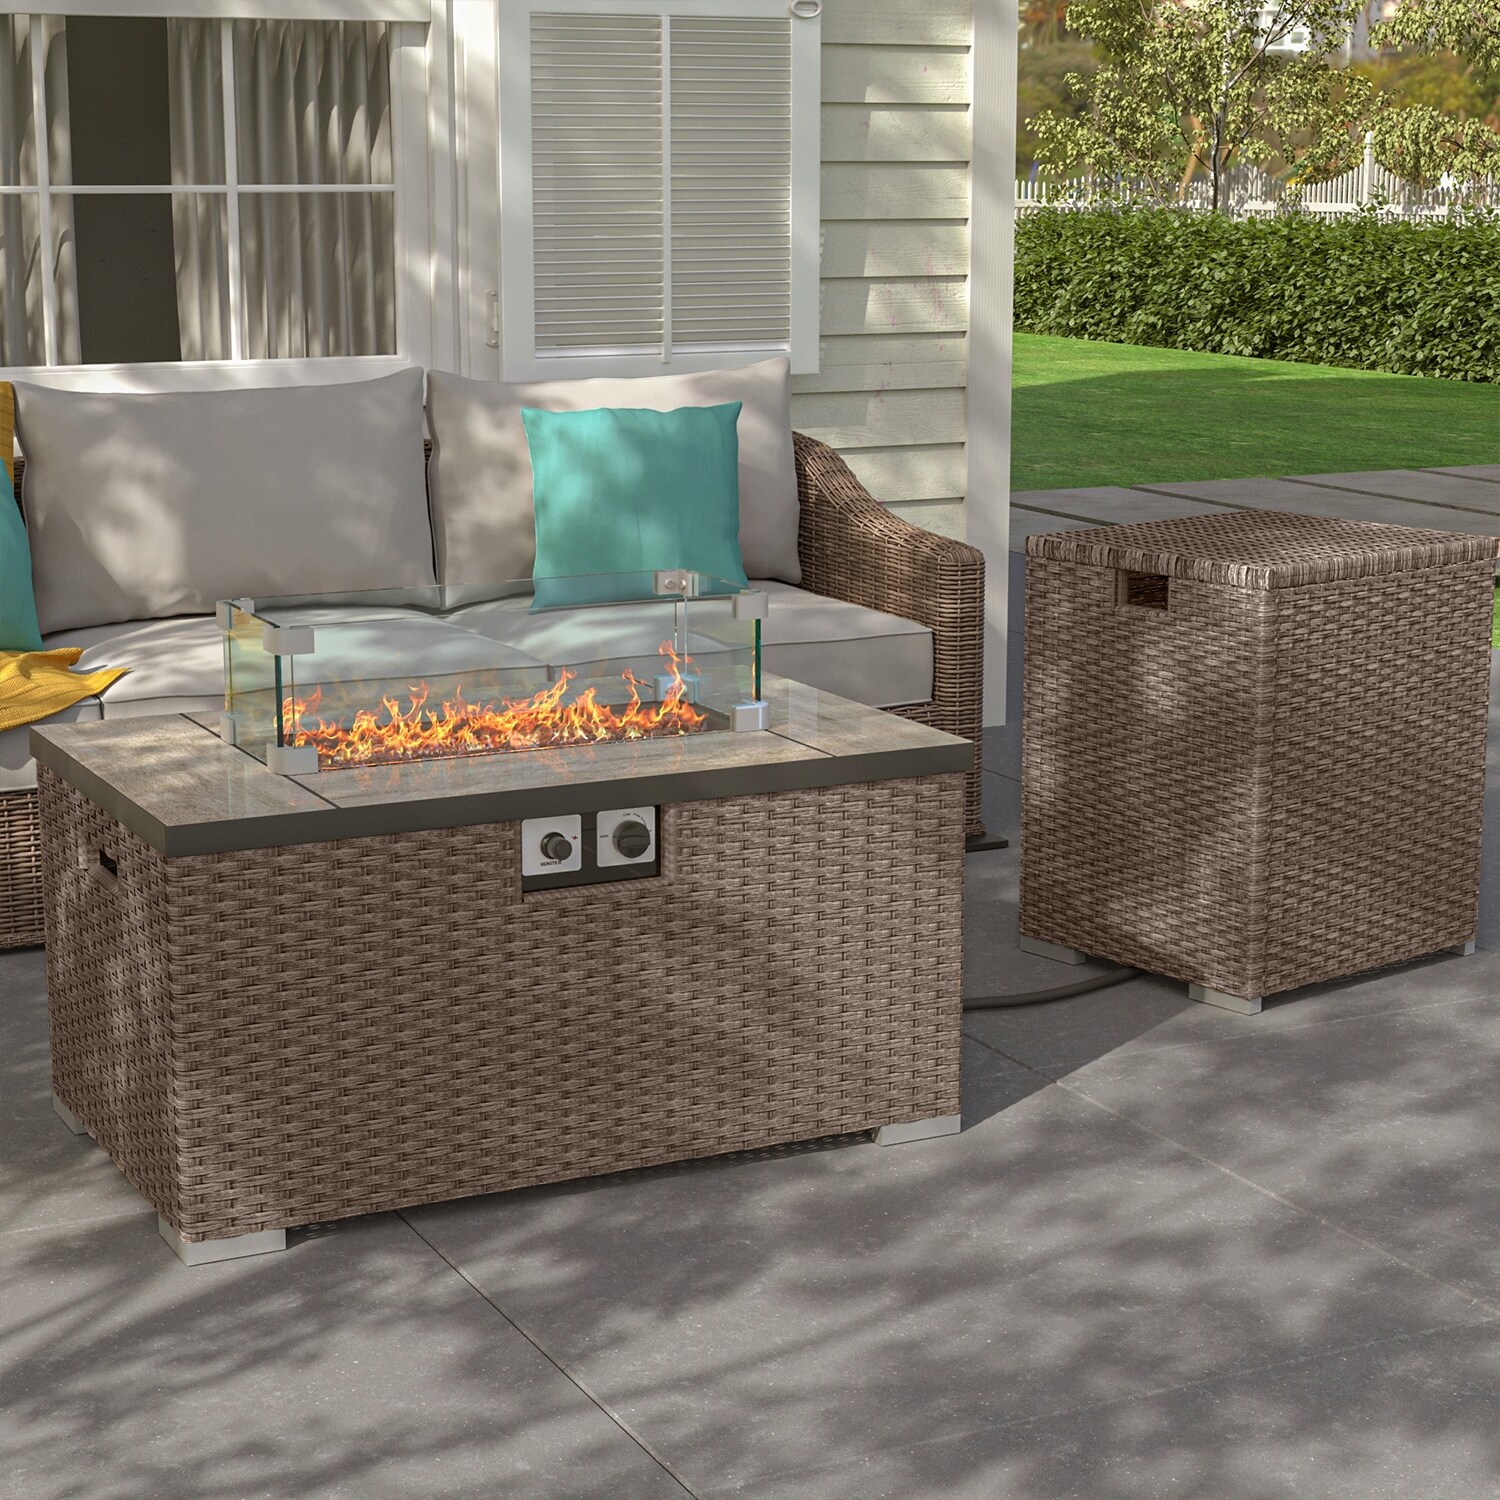 Kinger Home Propane Fire Pit Table 28 Inch French Roast with Glass Wind Guard Cover and Lid 50,000 BTU Rattan Wicker Gas Fire Pit Table for Outdoor Patio Slide Out Tank Holder Lava Rocks 